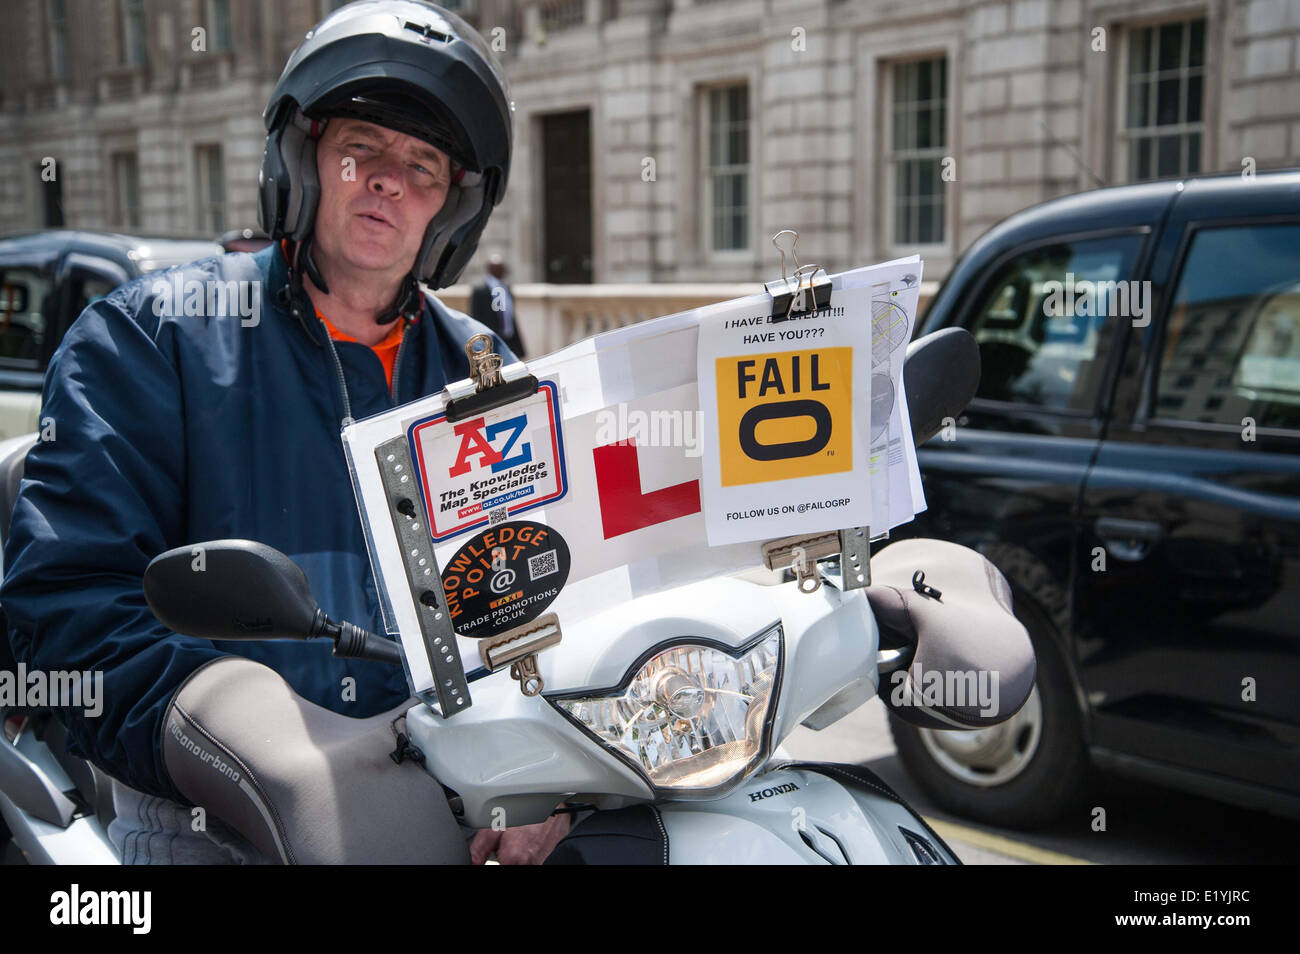 London, UK. 11th June 2014.  A driver taking the knowledge has anti-TfL and ant-Uber flyers on his screen as Taxi drivers hold an anti-Uber protest in Central London. A series of protest have been held across Europe by traditional taxi services who are angry about the lack of regulation of the cab firm Uber. Credit:  Pete Maclaine/Alamy Live News Stock Photo